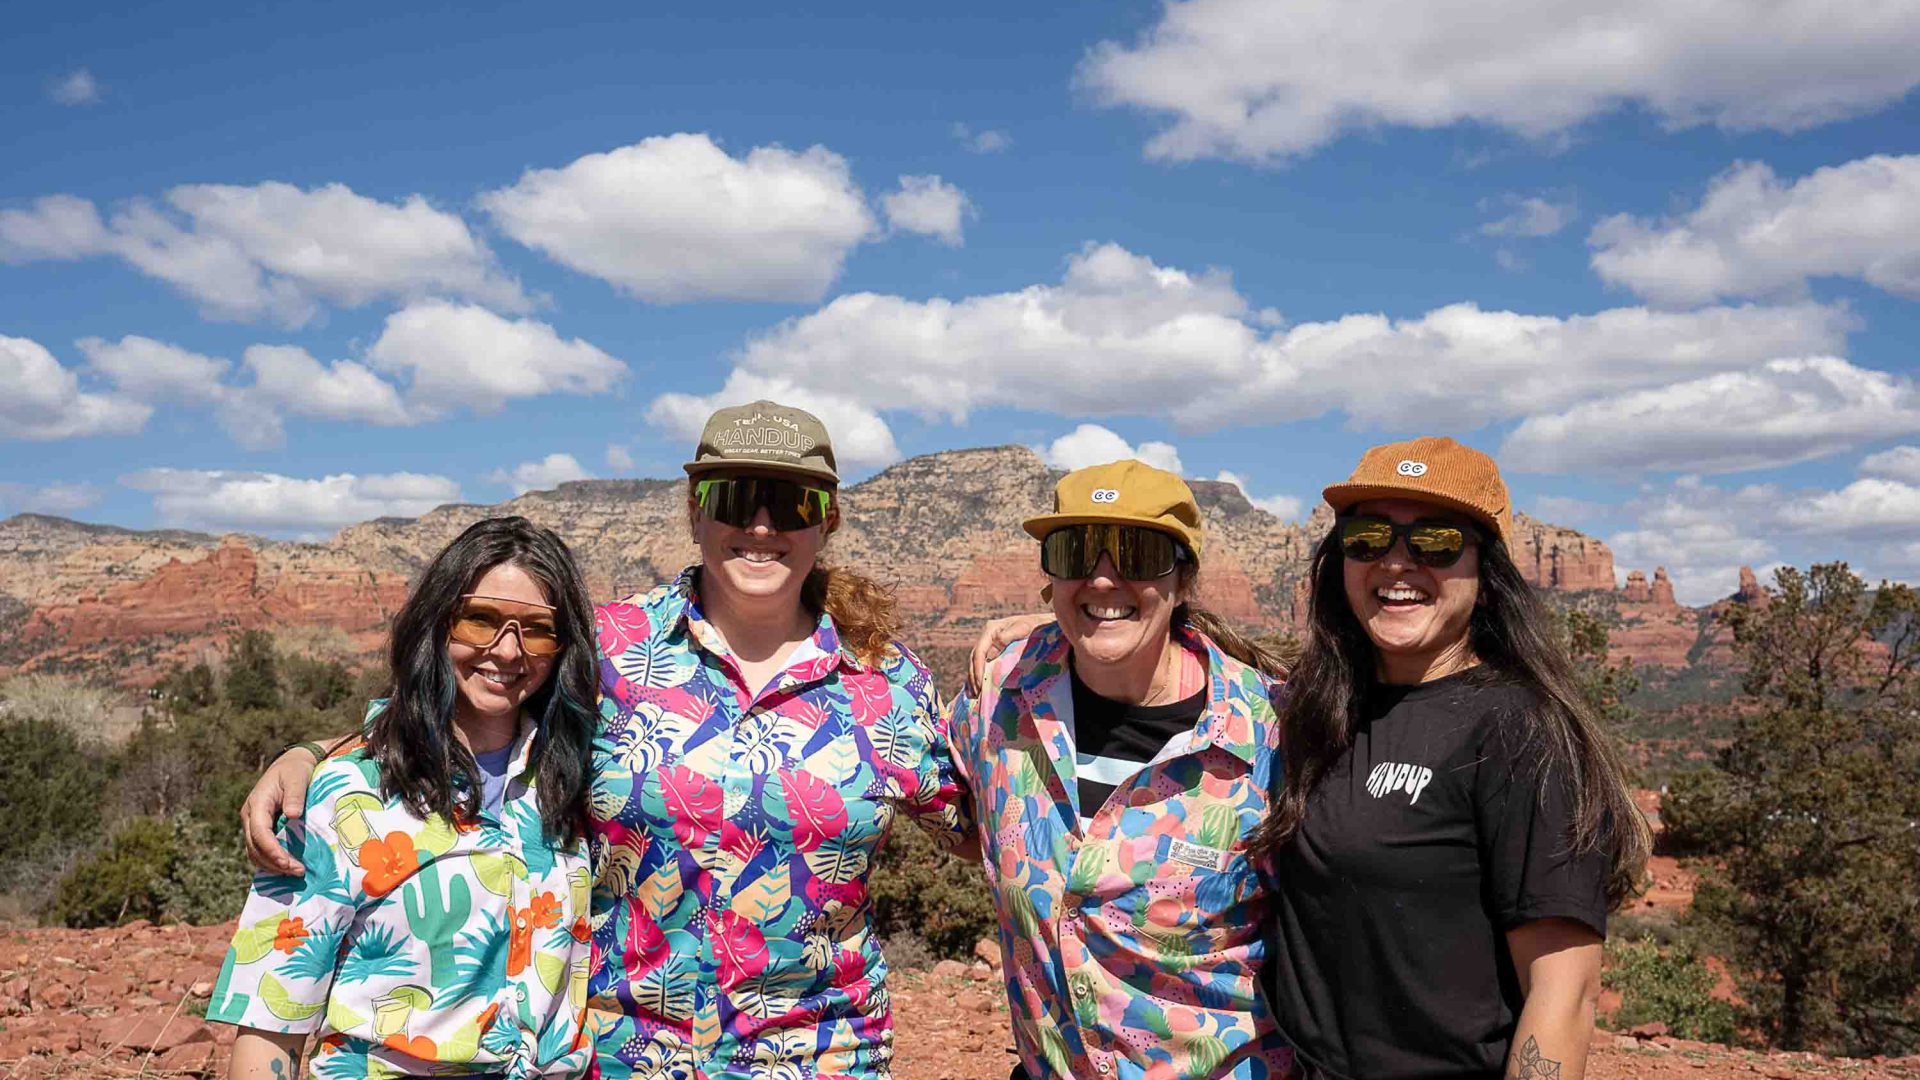 A group of four women smile for a photo. Three wear bold and colorful shirts.